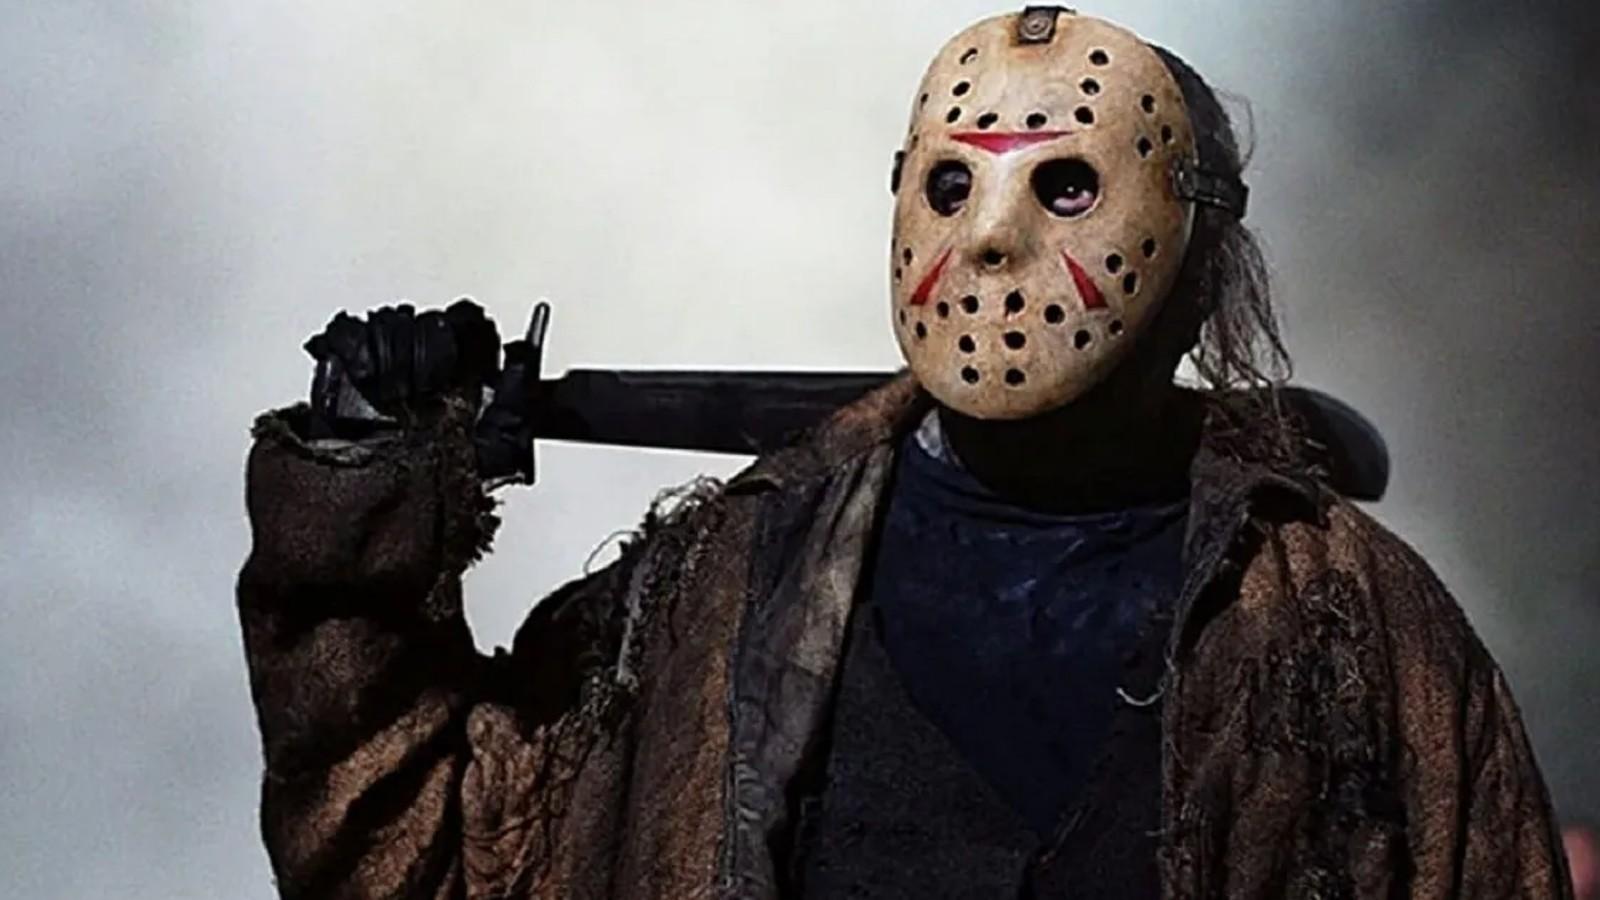 Jason Voorhees in his iconic Friday the 13th hockey mask.